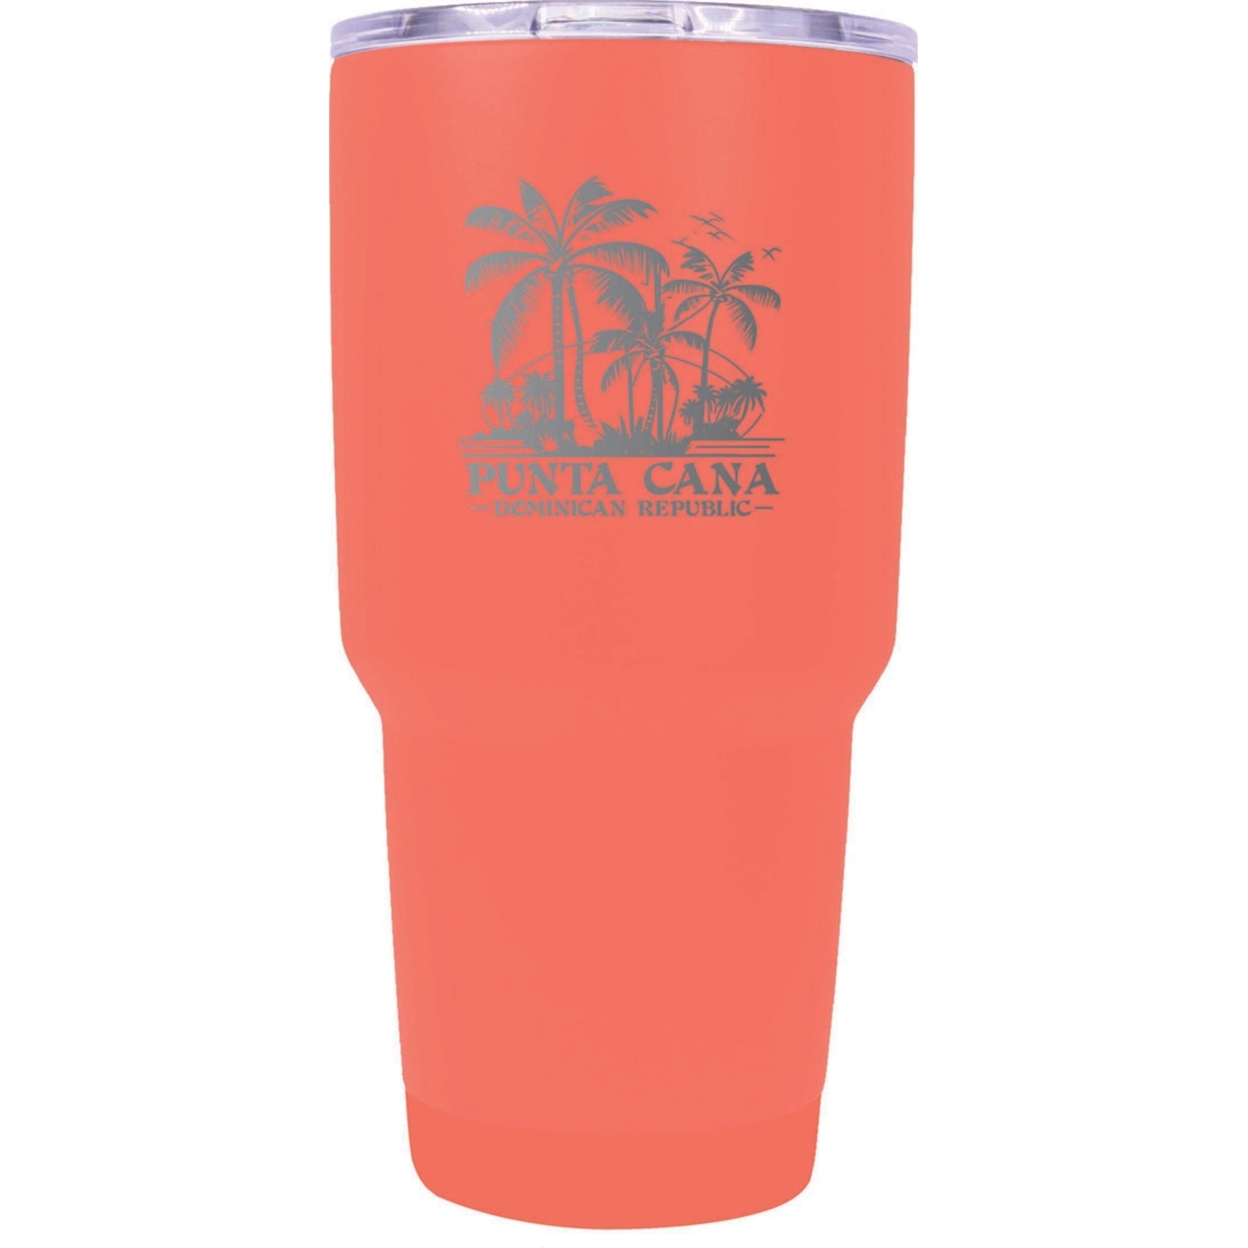 Punta Cana Dominican Republic Souvenir 24 Oz Insulated Stainless Steel Tumbler Etched - Coral, PALMS